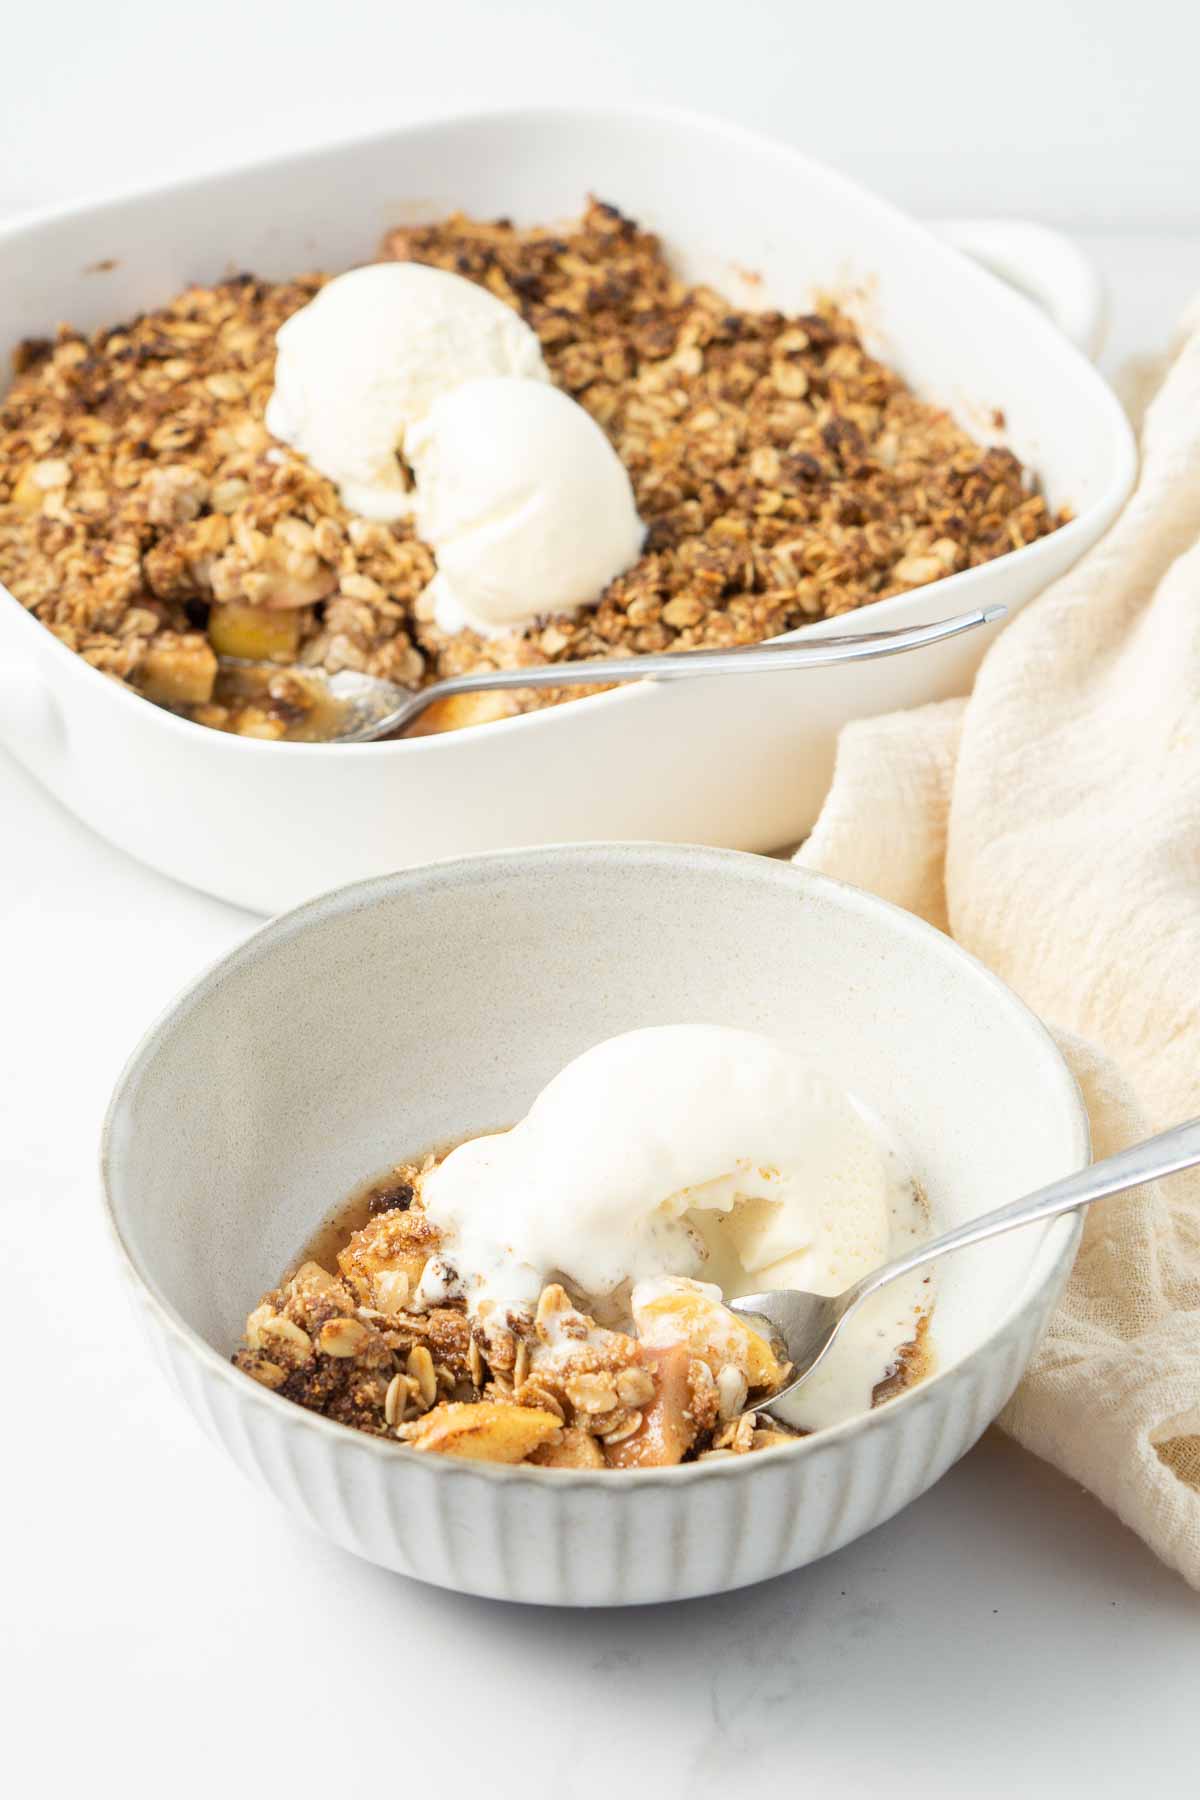 Apple crumble and ice cream in a bowl.